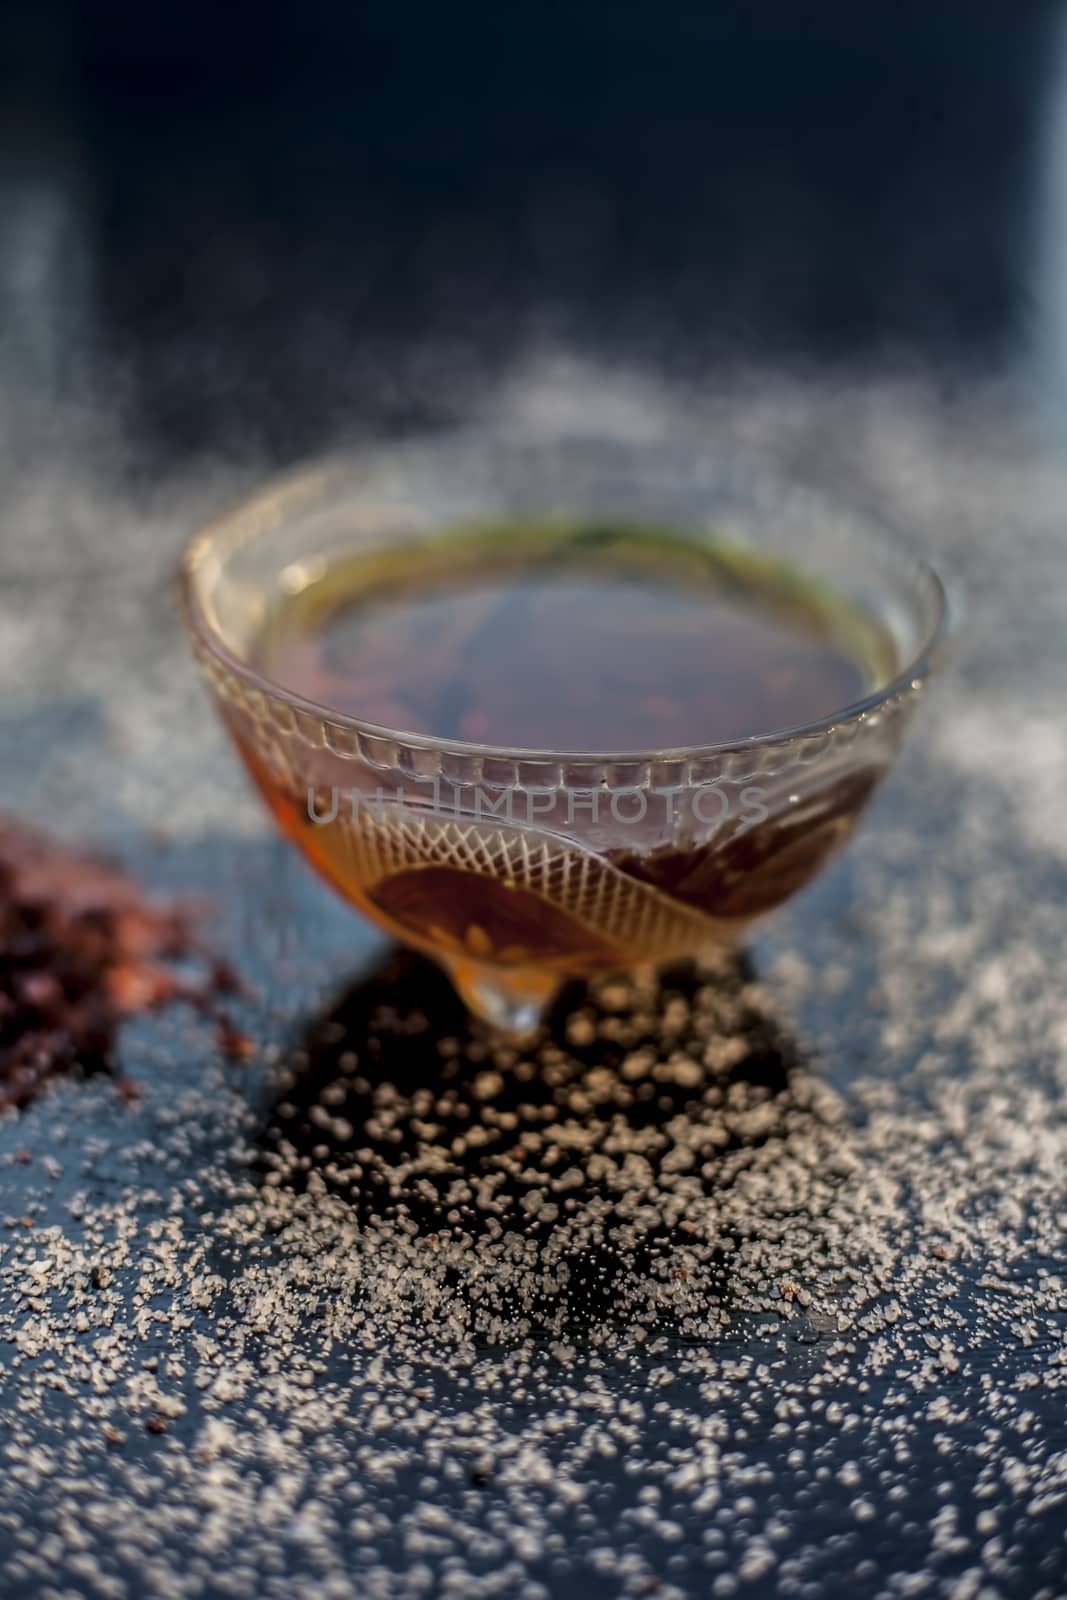 Close up of a glass bowl full of organic honey used in spa on black glossy surface with some white crystals spread on the surface. Vertical shot.